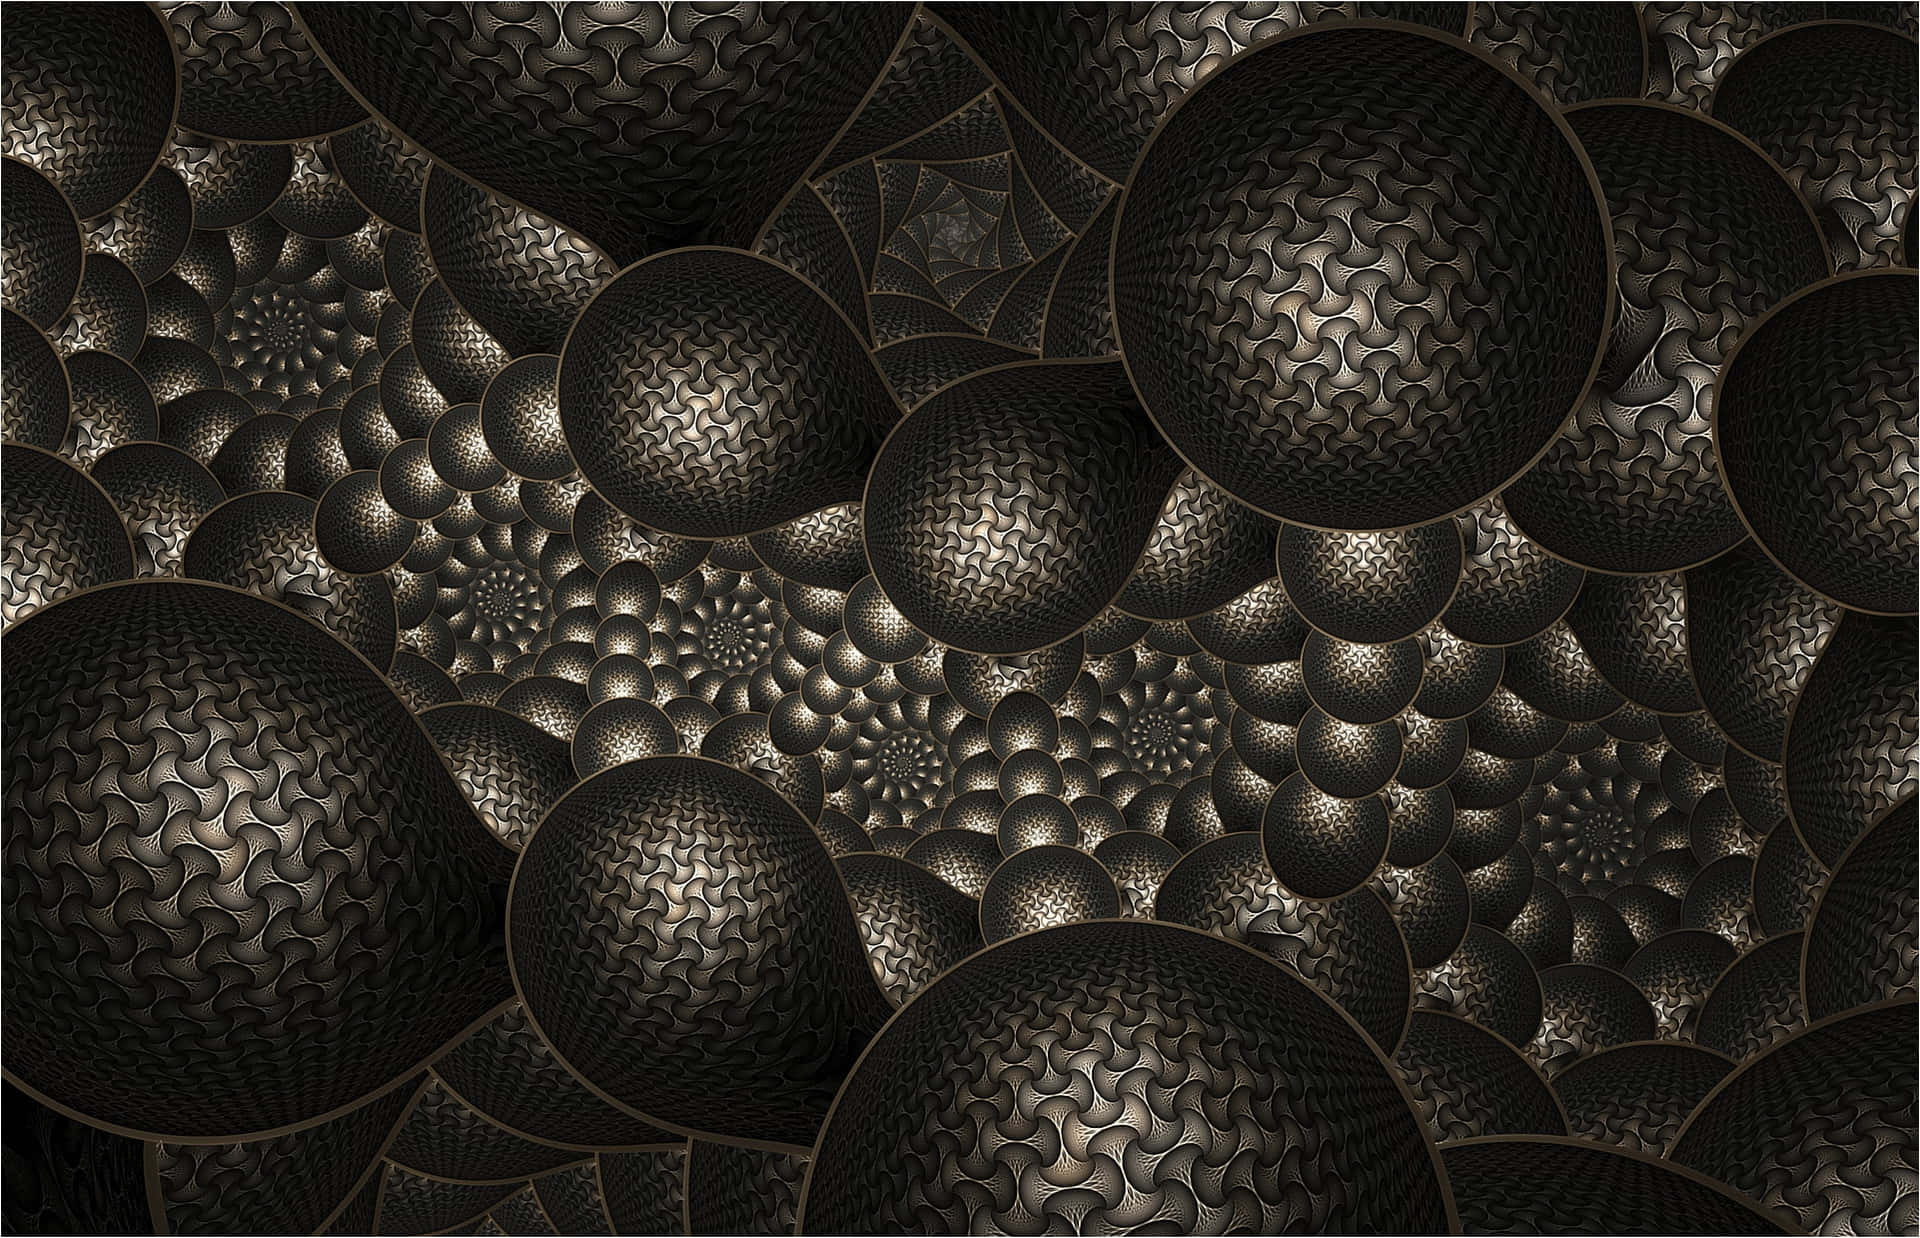 Textured Spheres Cool Optical Illusions Wallpaper